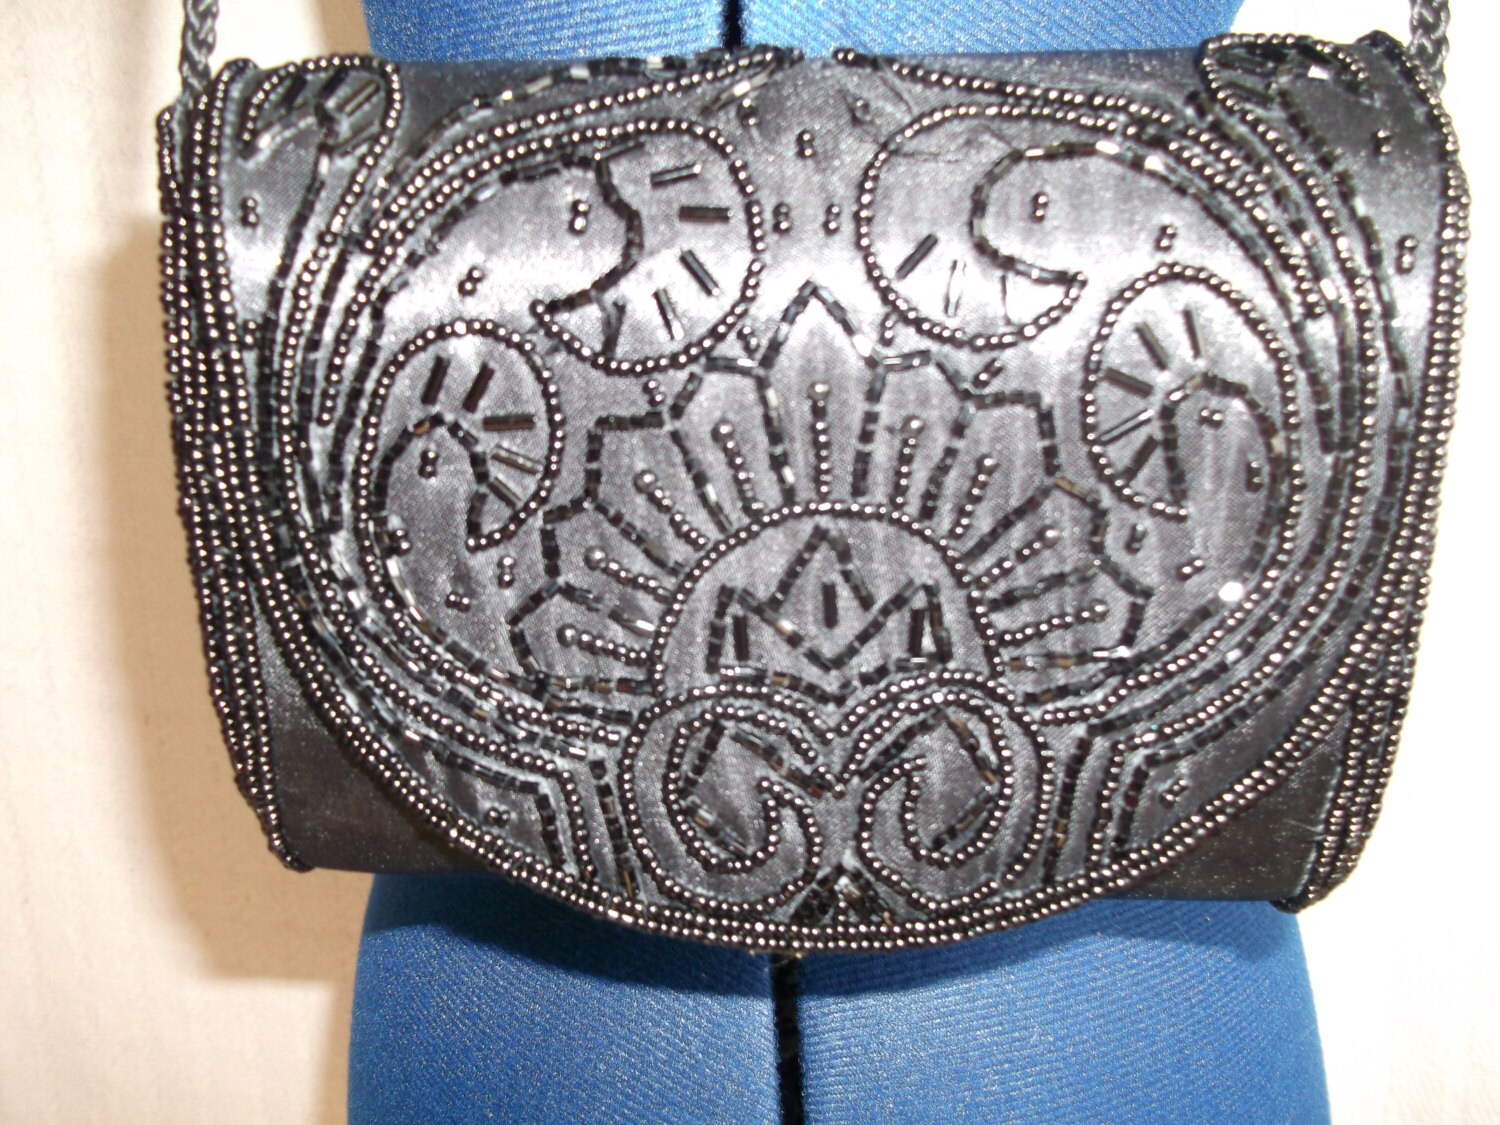 VIntage Glam Unusual black satin shoulder/clutch bag with beadwork detail, fab gift item or party wear accessory Etsy